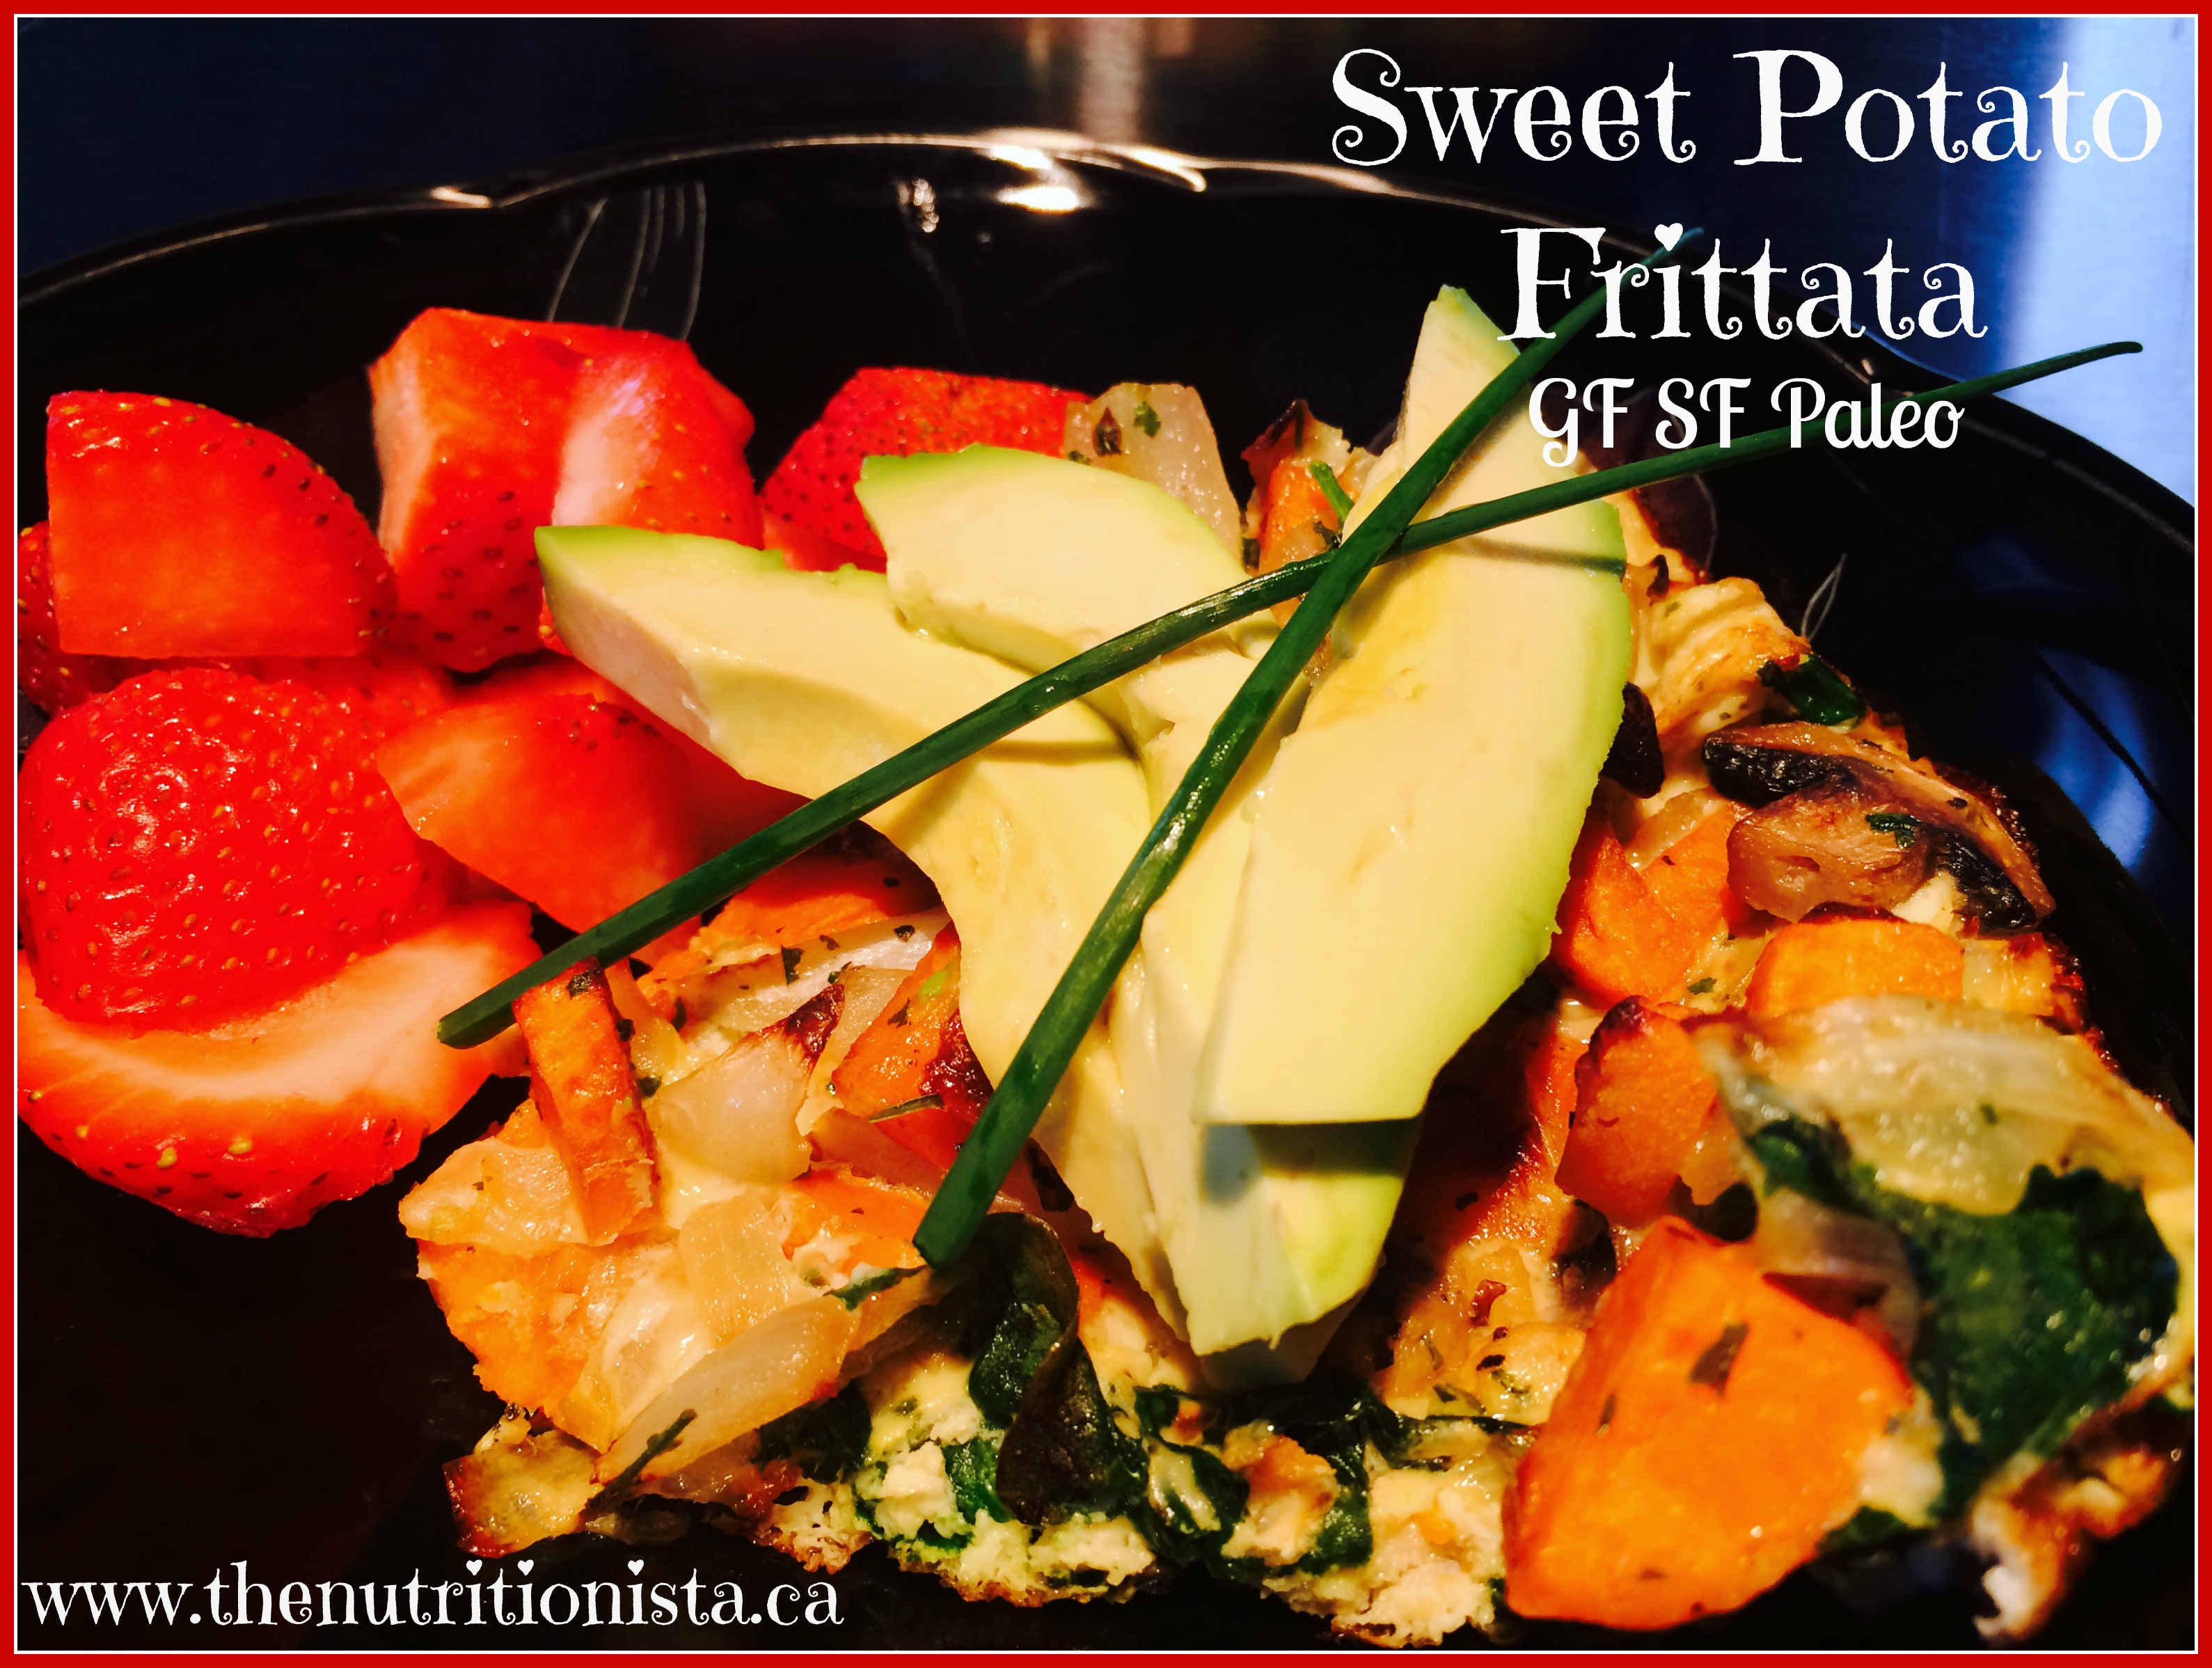 I'm totally making this for breakfast tomorrow! Super quick, easy and healthy gluten-free paleo sweet potato frittata with avocado. Yum! Via @bcnutritionista